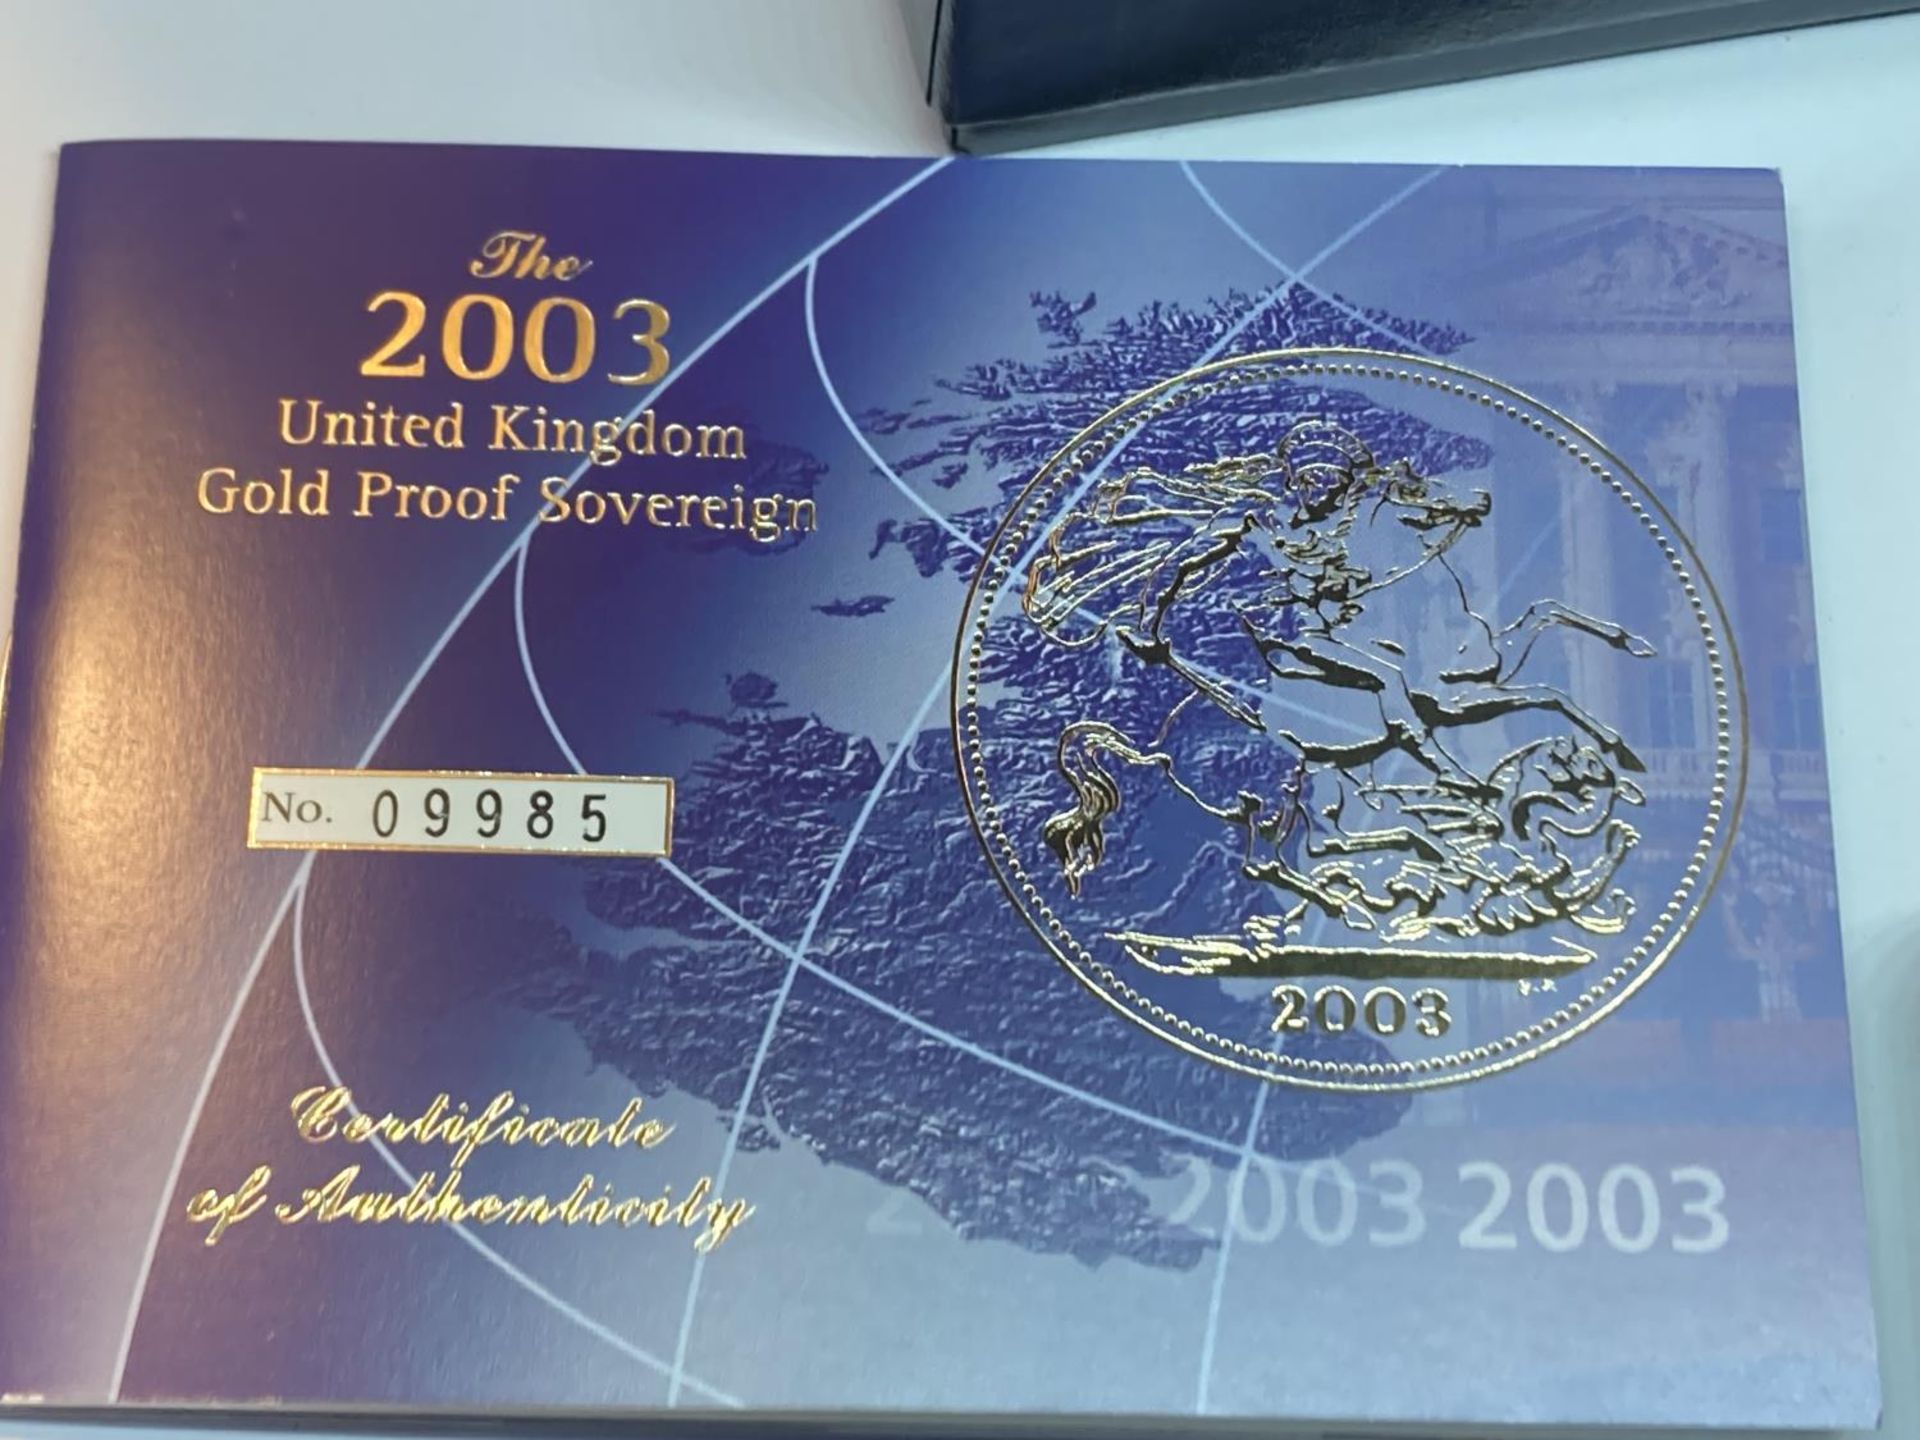 A 2003 GOLD PROOF SOVEREIGN QUEEN ELIZABETH II NO 09985 OF 15,000 IN A PRESENTATION BOX WITH - Image 4 of 5